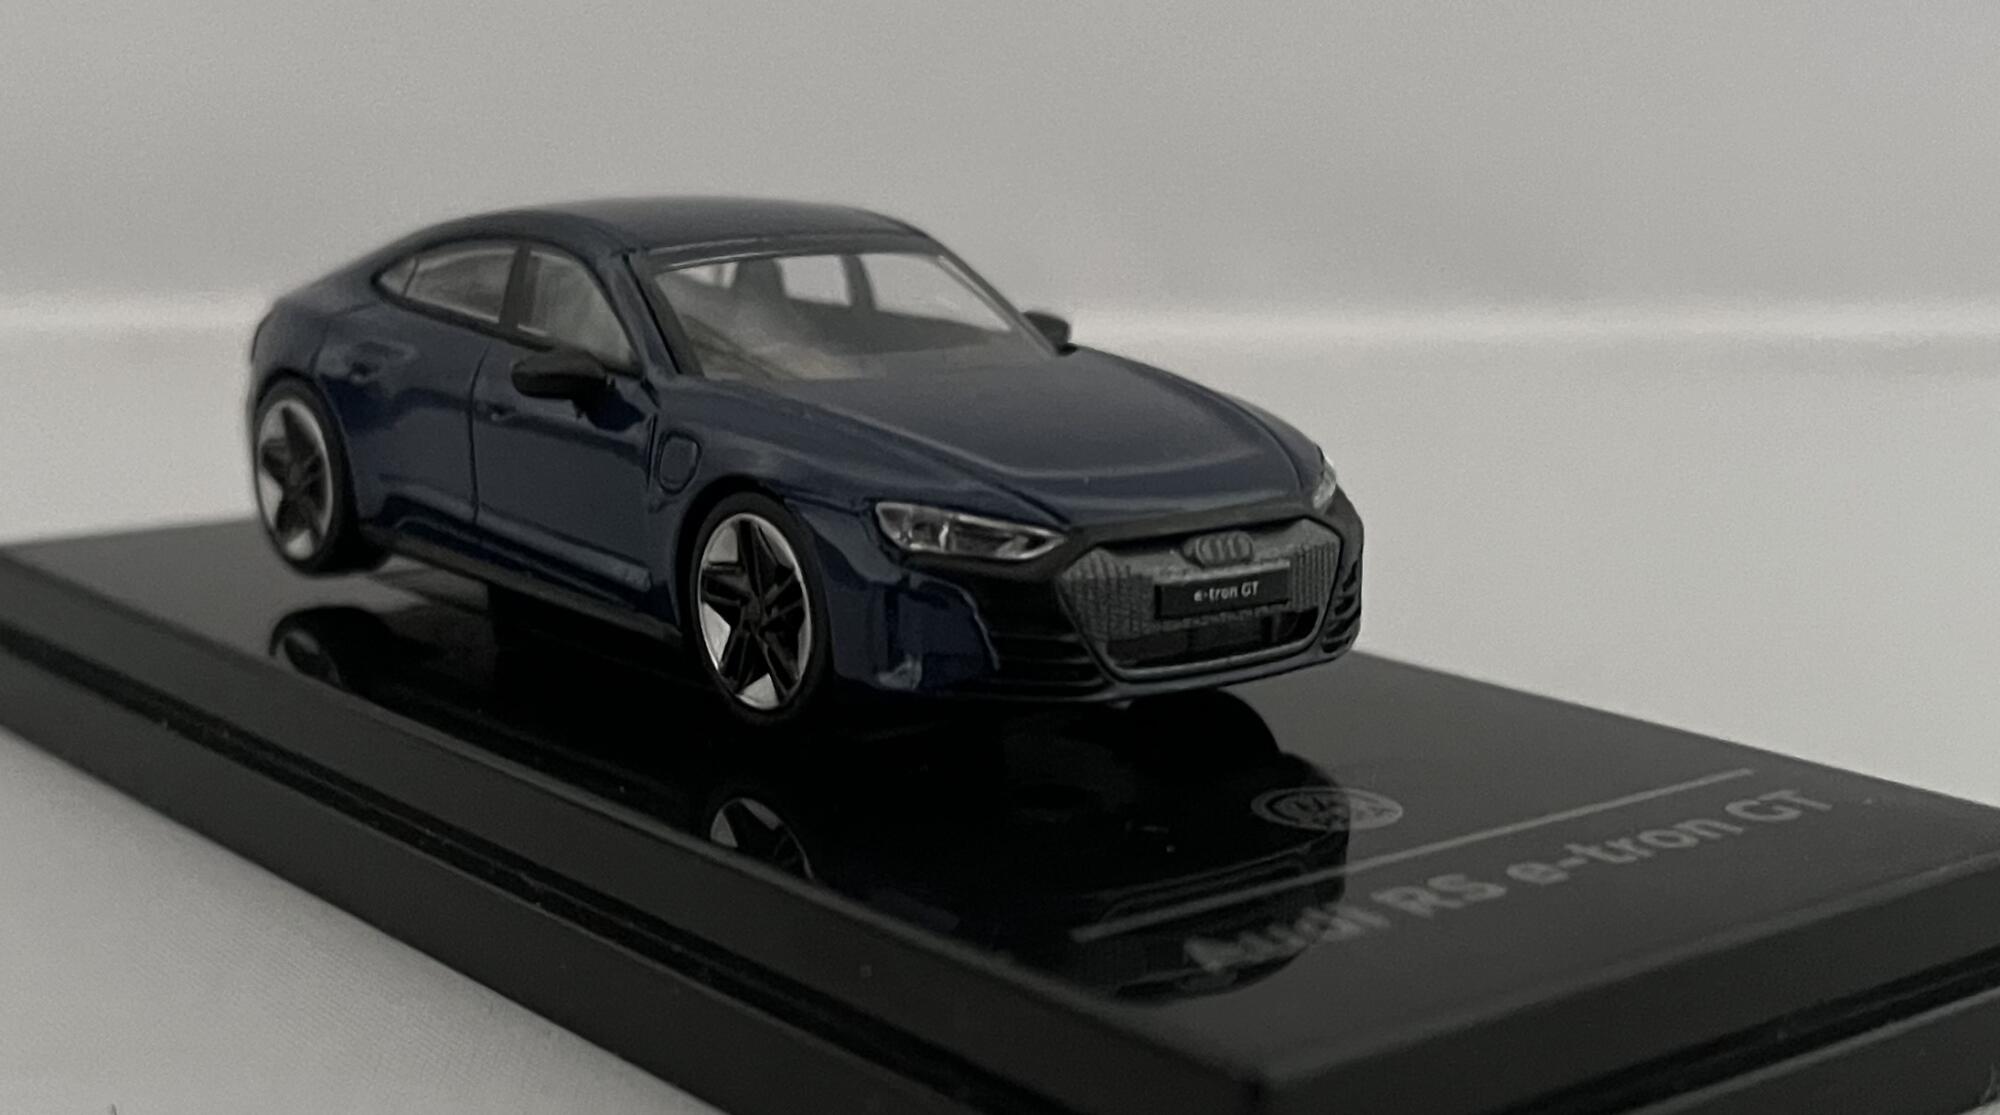 Audi RS e-tron GT 2021 in ascari blue 1:64 scale diecast car model from Paragon Models, 65333, approx 7.5cm long